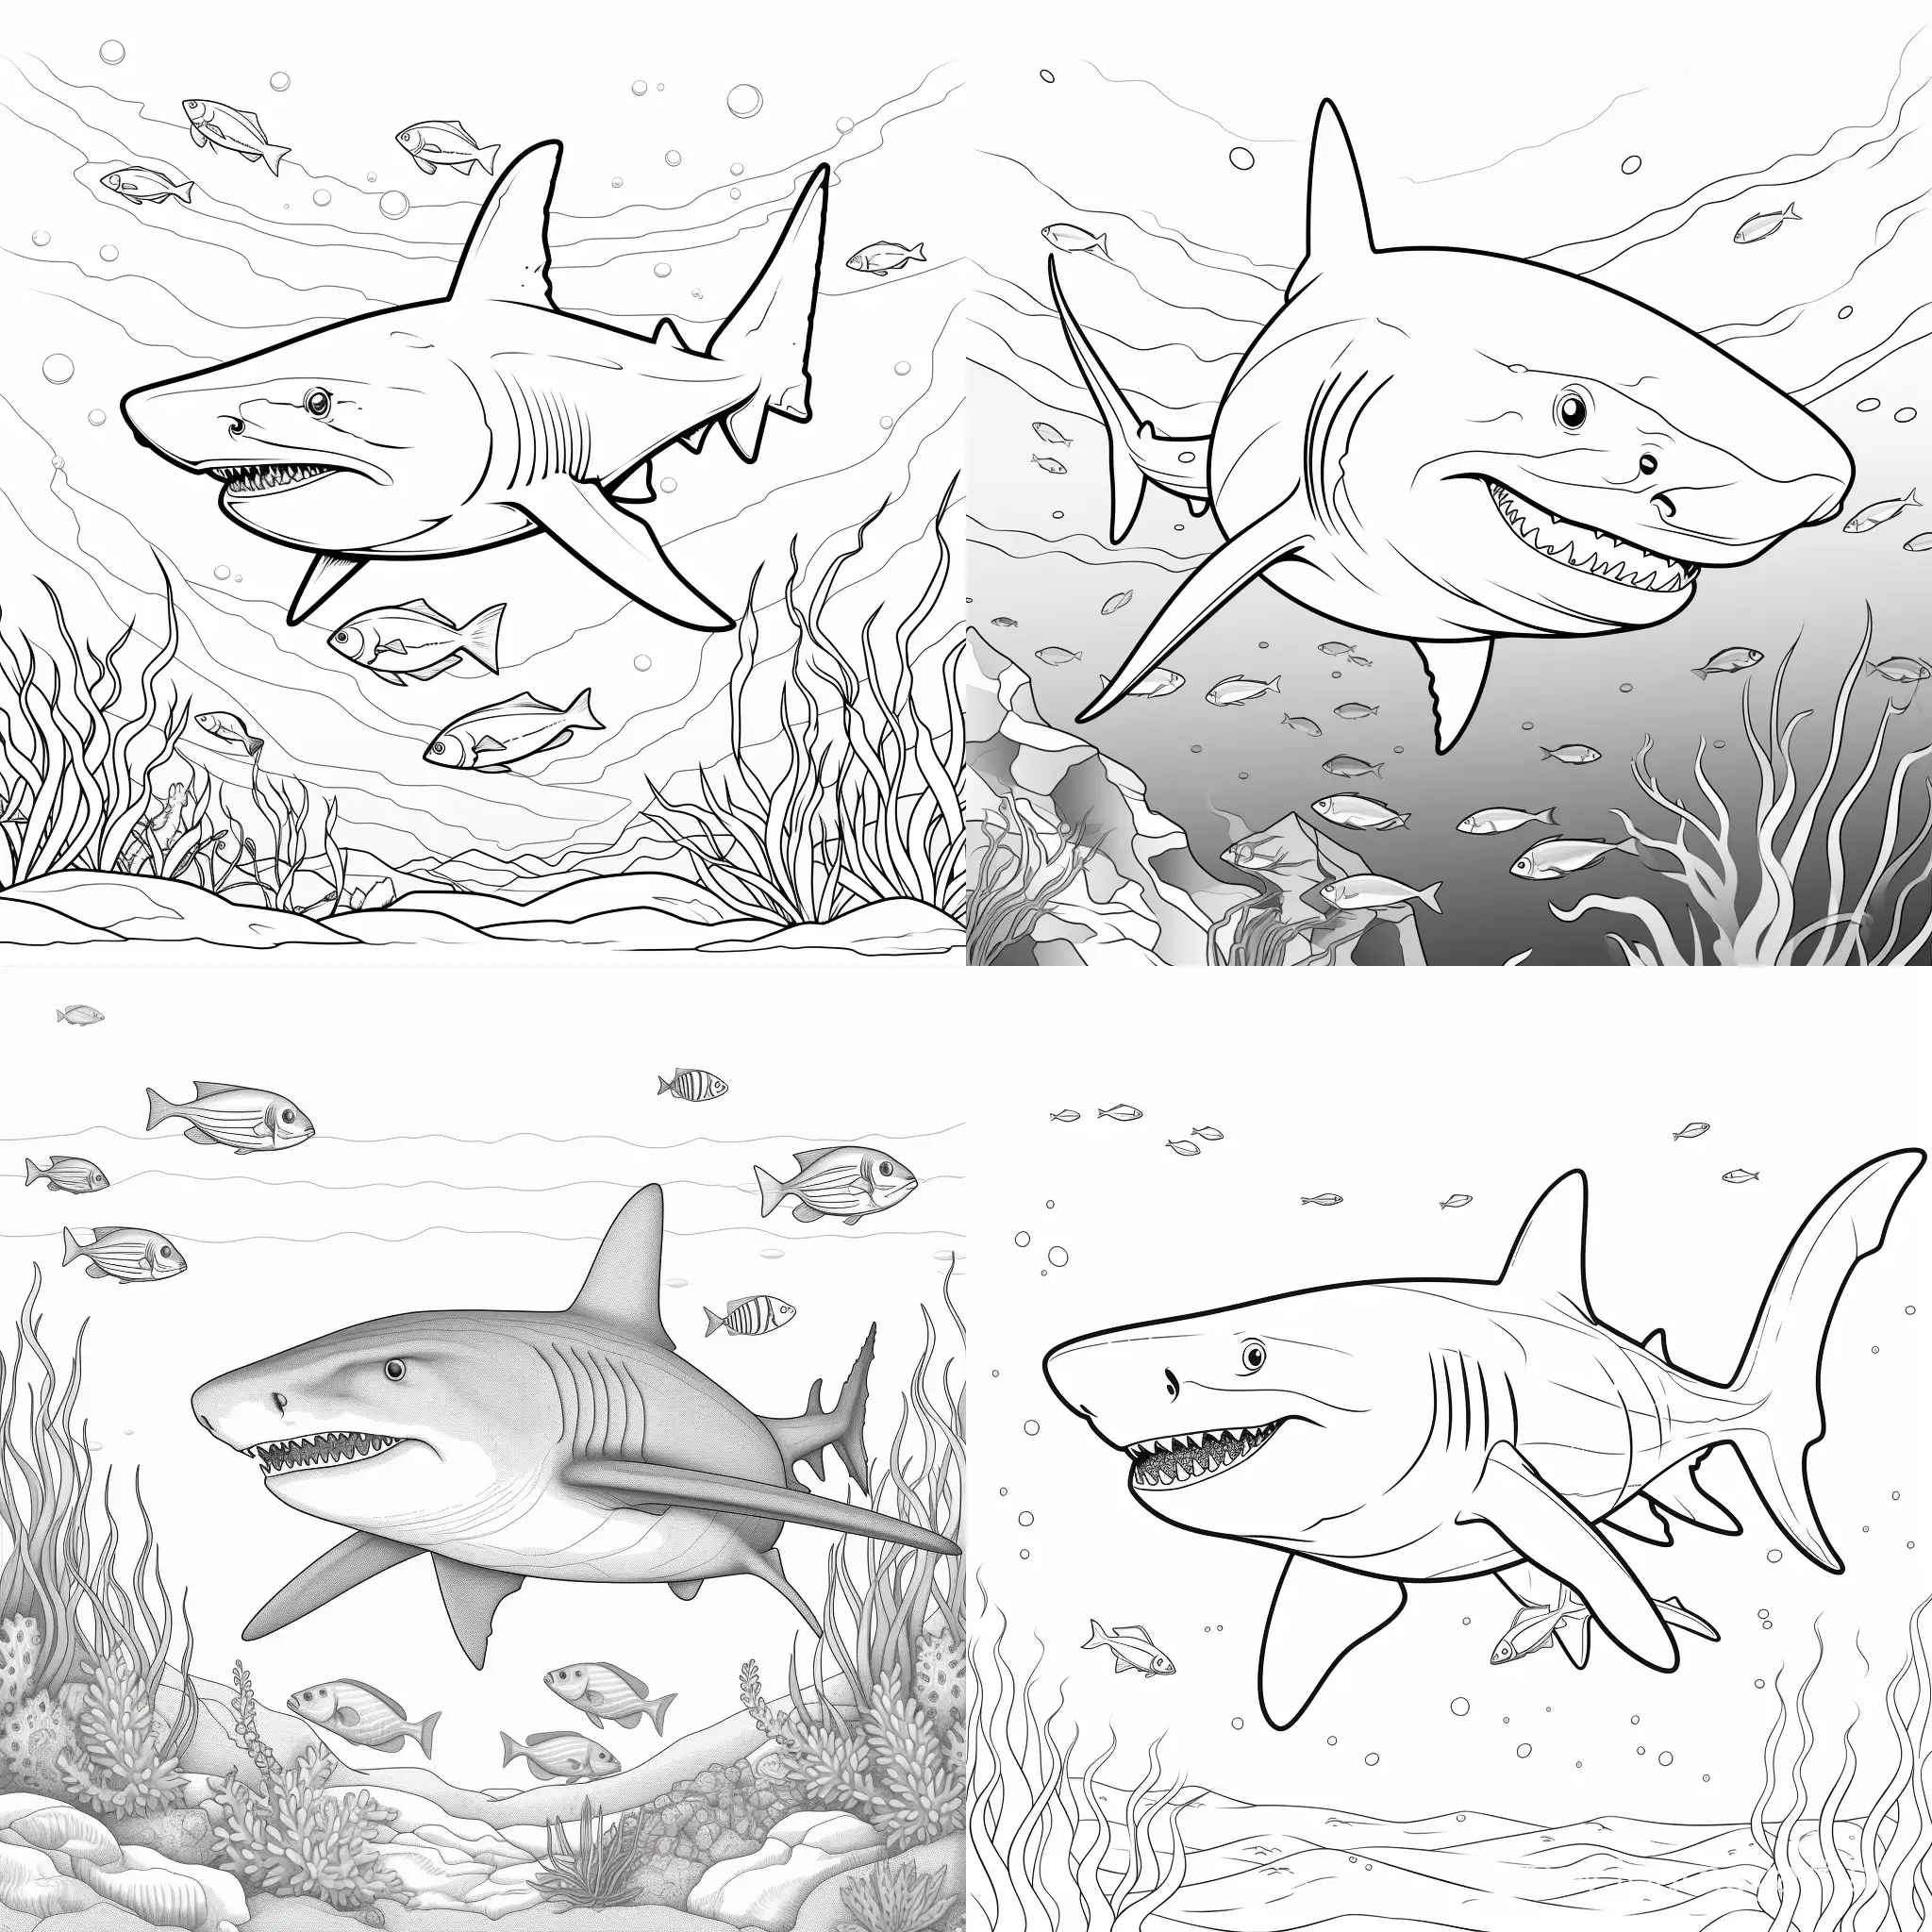 shark image, childrens colouring book, stencil, no background, fine lines, black and white, friendly cartoon, lines only, 50 image